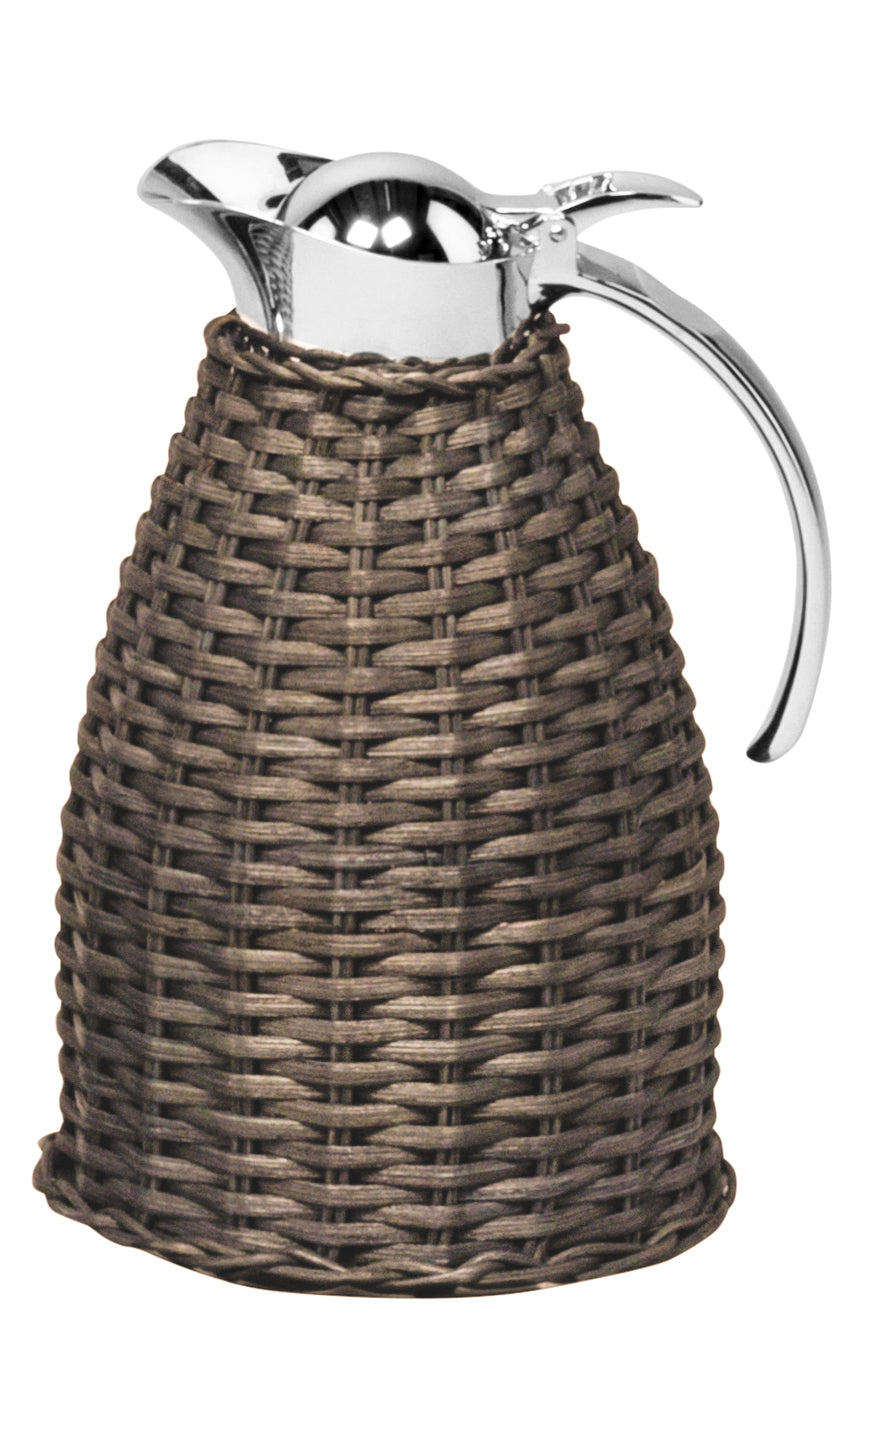 Monceau Carafe by Pigment France | Partially rattan-covered insulated stainless steel carafe with chrome-plated finish. Two-chamber structure maintains liquid temperatures. Precise pouring with specially developed hinged lid for one-hand operation. | Tableware and Drinkware | 2Jour Concierge, your luxury lifestyle shop